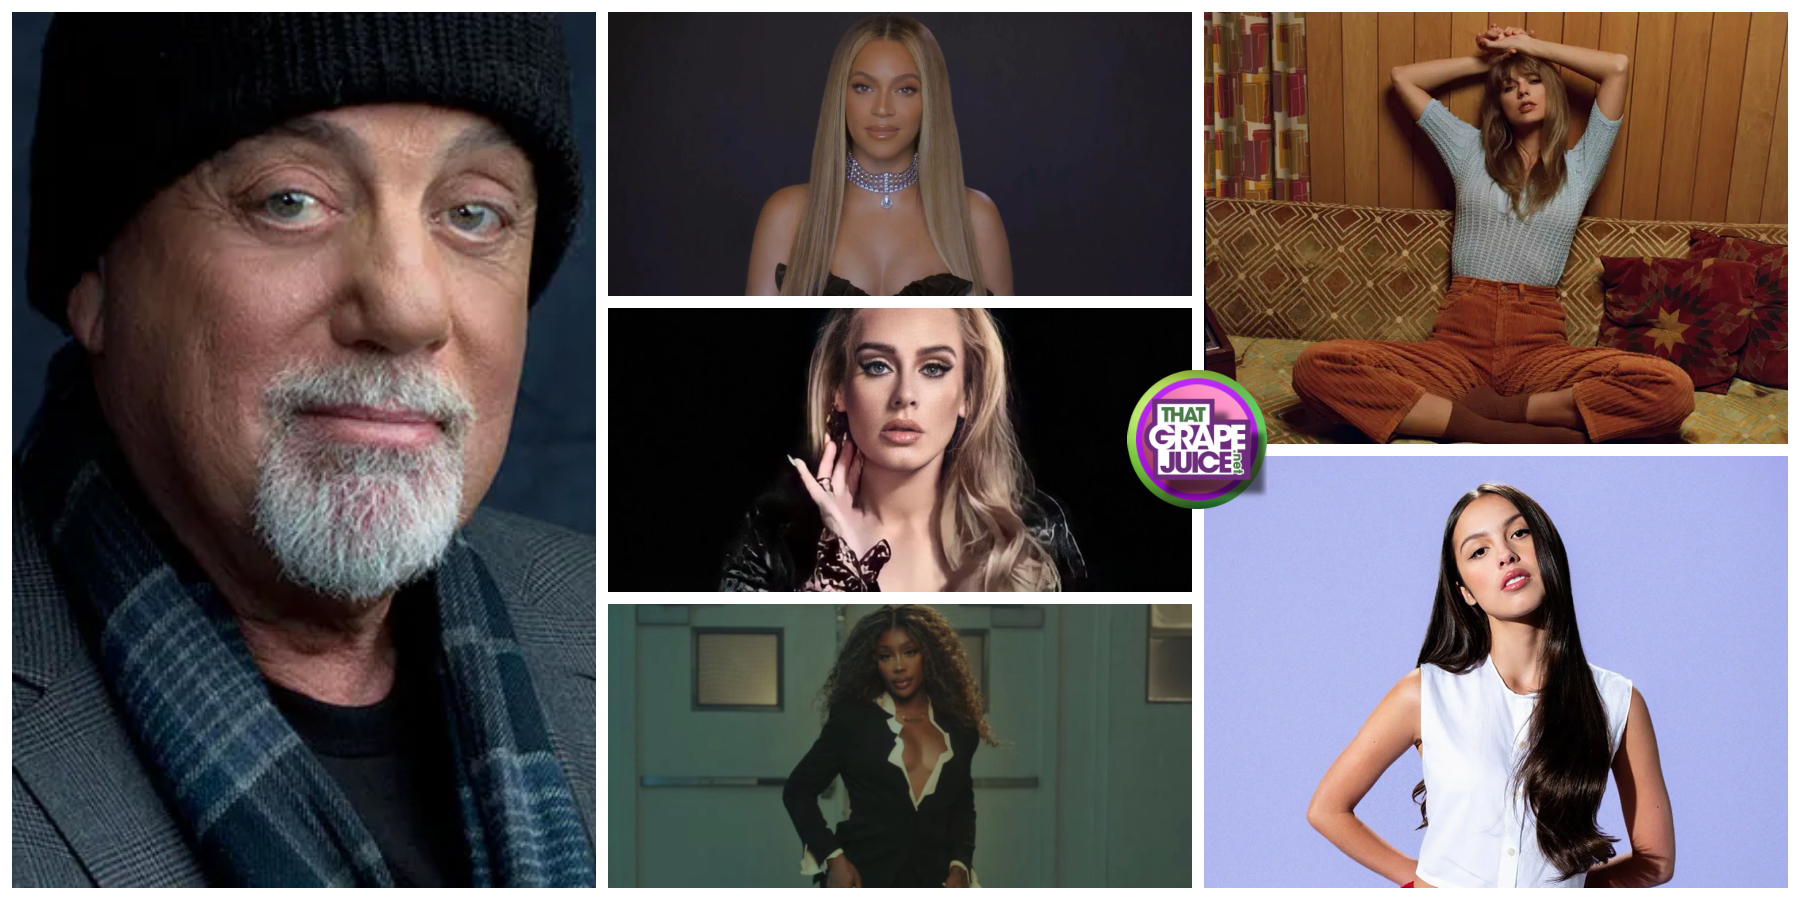 Beyonce, SZA, & Adele Fans Slam Billy Joel For Saying Taylor Swift & Olivia Rodrigo Are the Only Singers “Making Albums Anymore”